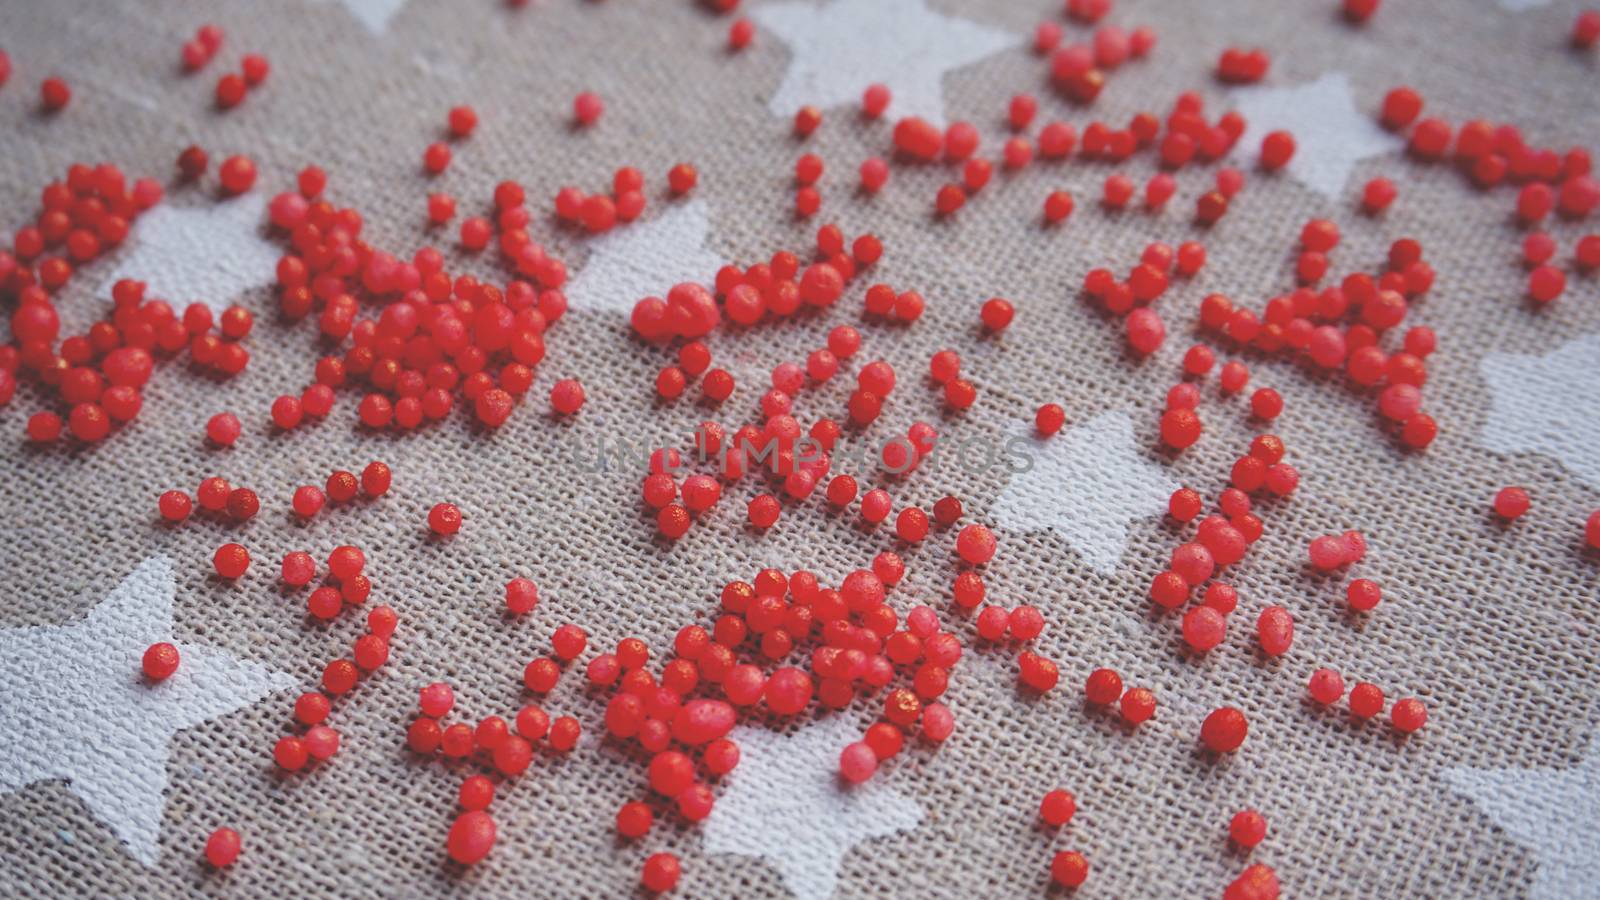 Red balls. Small gel ball. Silica gel. Balls of red hydrogel. Texture background by natali_brill